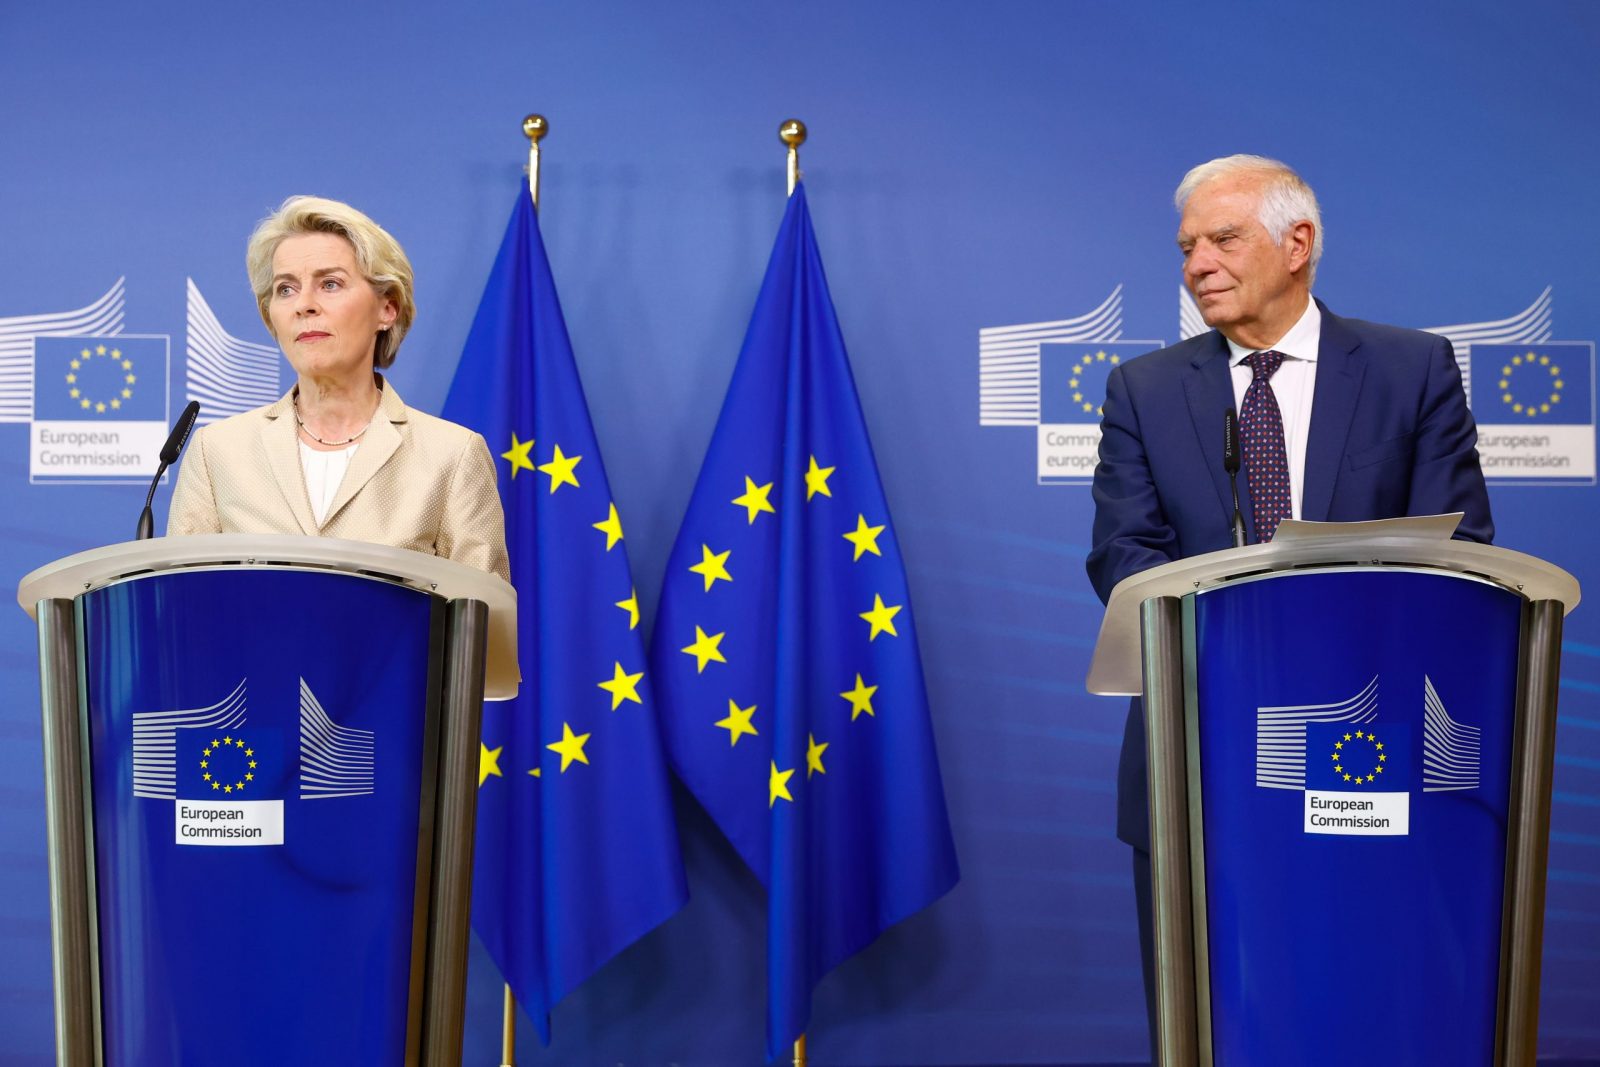 epa10211624 European Commission President Ursula von der Leyen (L) and EU High Representative for Foreign Affairs and Security Policy and European Commission Vice-President, Josep Borrell (R) hold a joint press statement to announce a new package of 'biting' sanctions against Russia at the European Commission in Brussels, Belgium, 28 September 2022. European Commission President Von der Leyen announced the proposal of a new package of sanctions against Russia to make 'the Kremlin pay the price' for the 'further escalation' of its invasion of Ukraine 'to a new level', condemning the 'sham referendum' to annex parts or Russia-occupied territories in Ukraine. The sanctions will include a listing of individuals and entities as well as further restrictions in trade, banning imports of Russian products, among others.  EPA/STEPHANIE LECOCQ